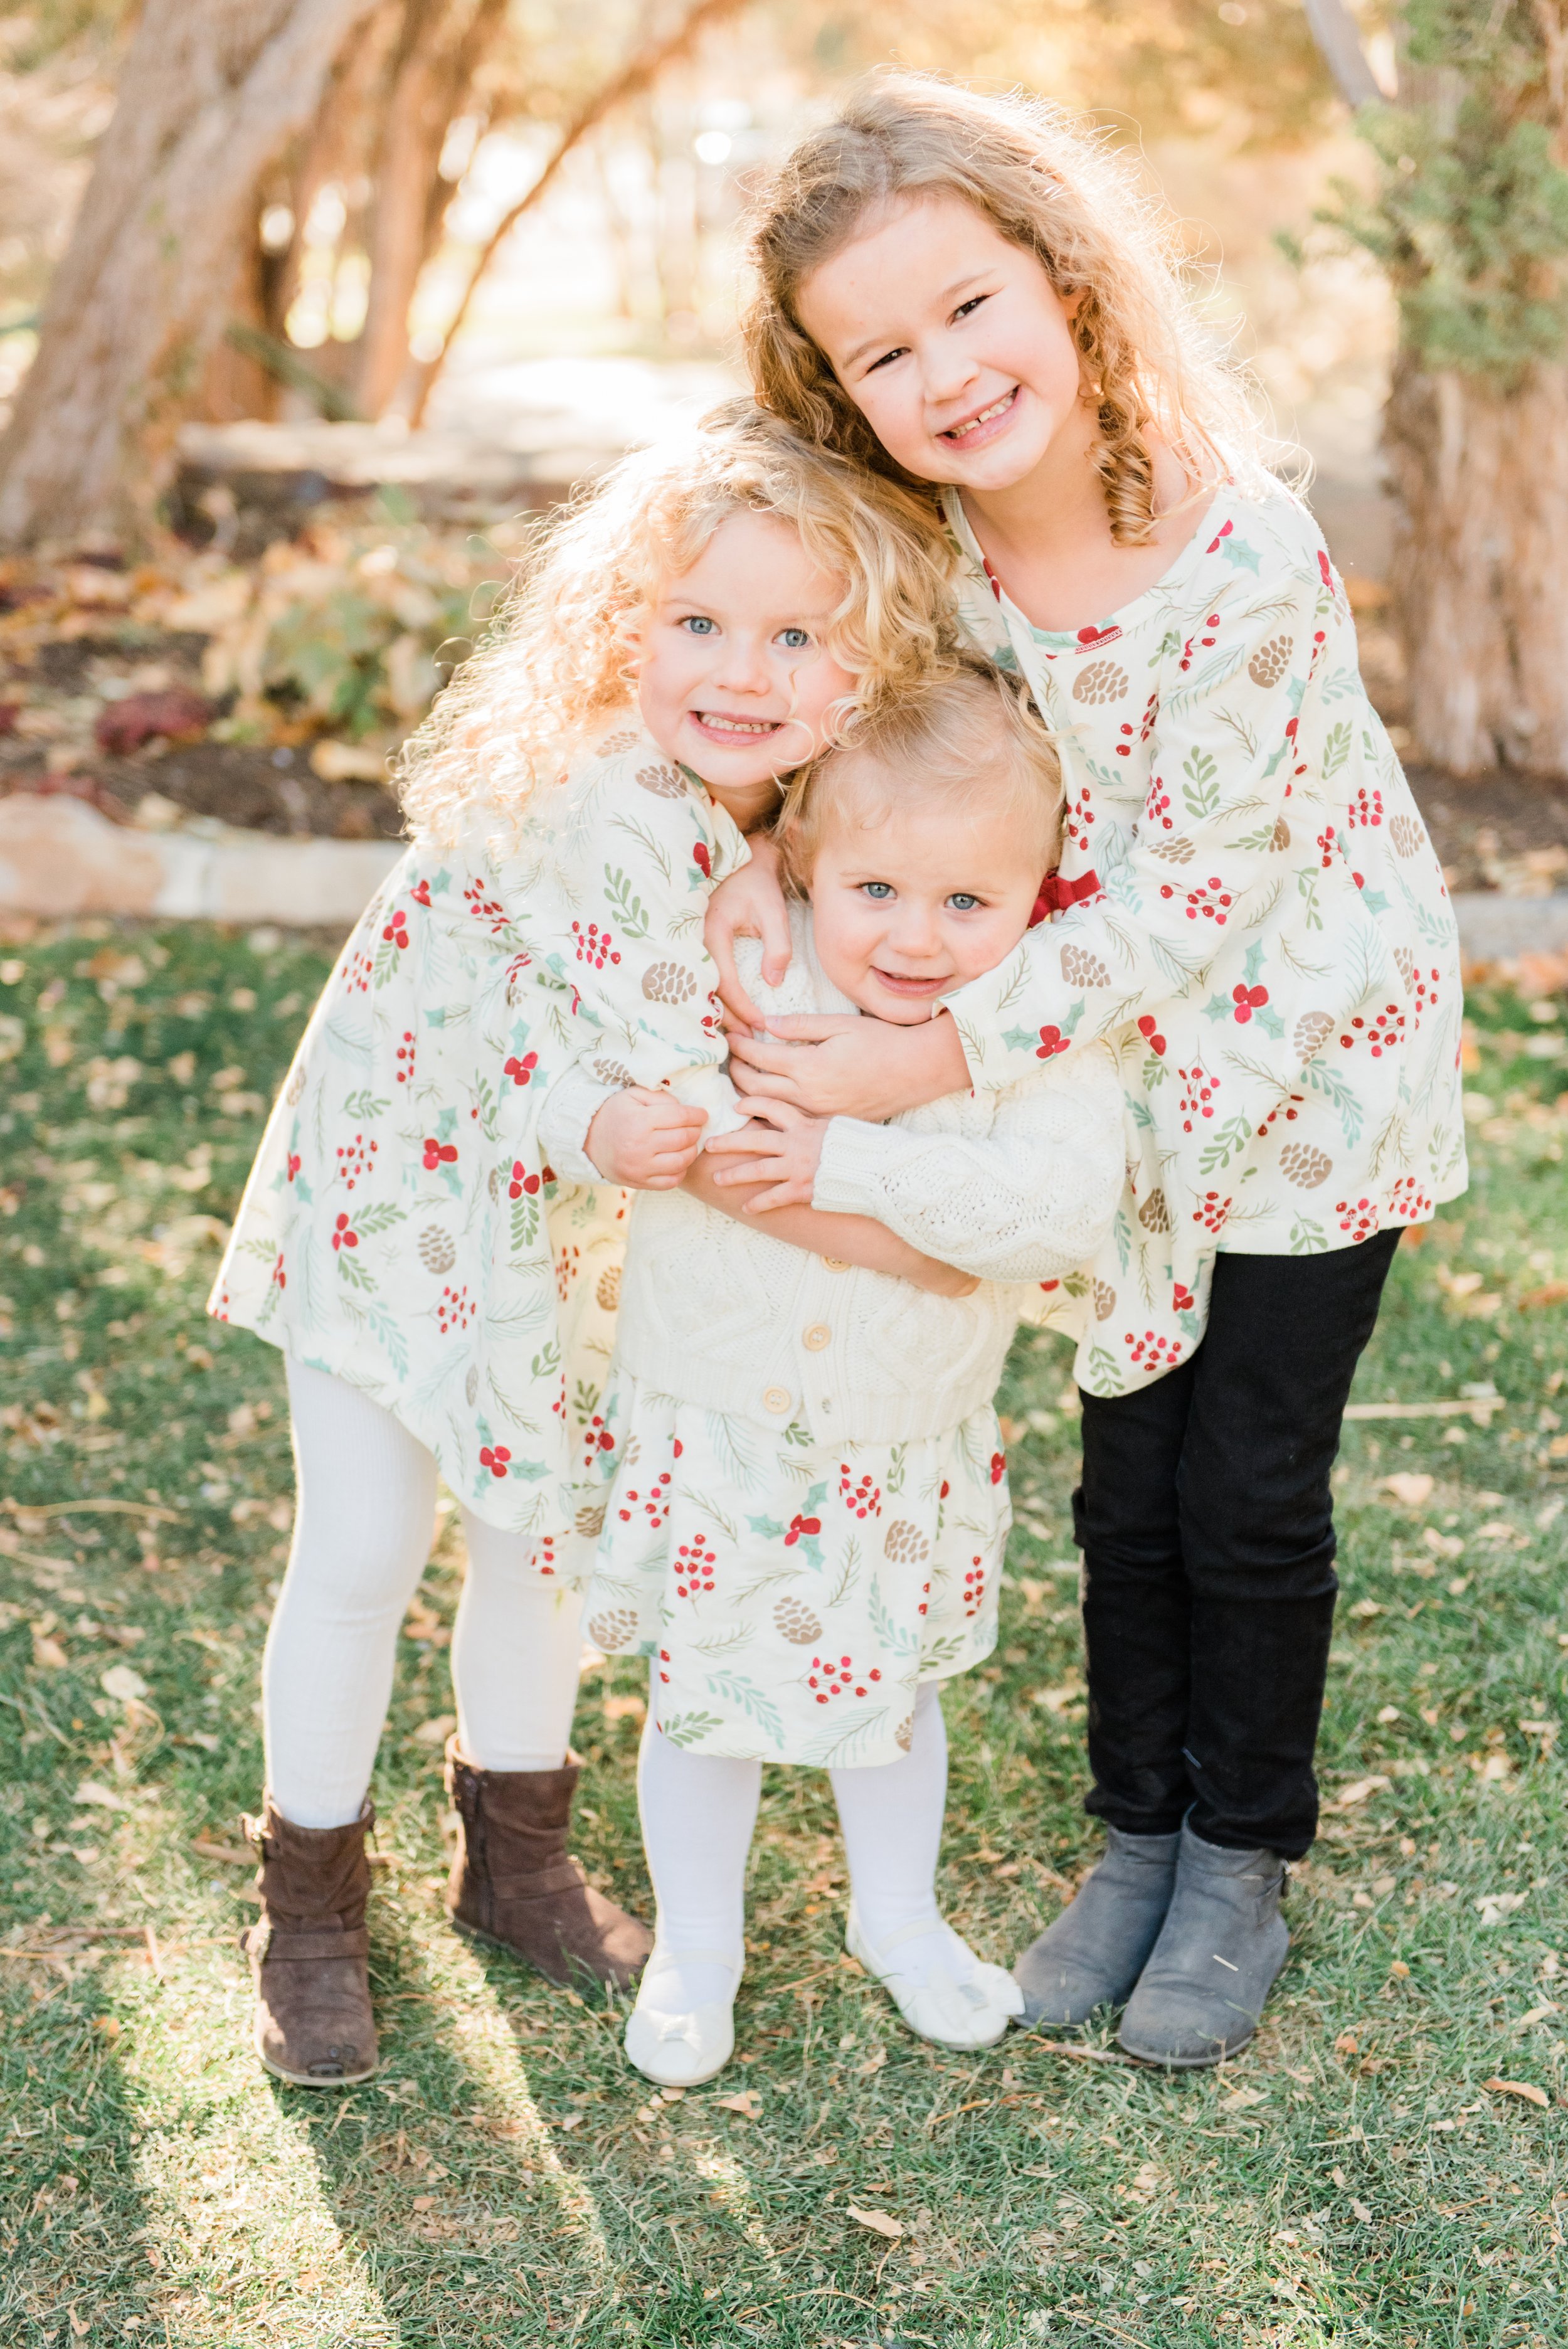  Three sweet sisters in matching outfits smile brightly together for a cherished sister photo. Sister photos momtog course Roswell GA Jacquie Erickson #diyphotography #firstdayofschoolphotos #capturethemoment #siblingphotos #jacquieerickson 